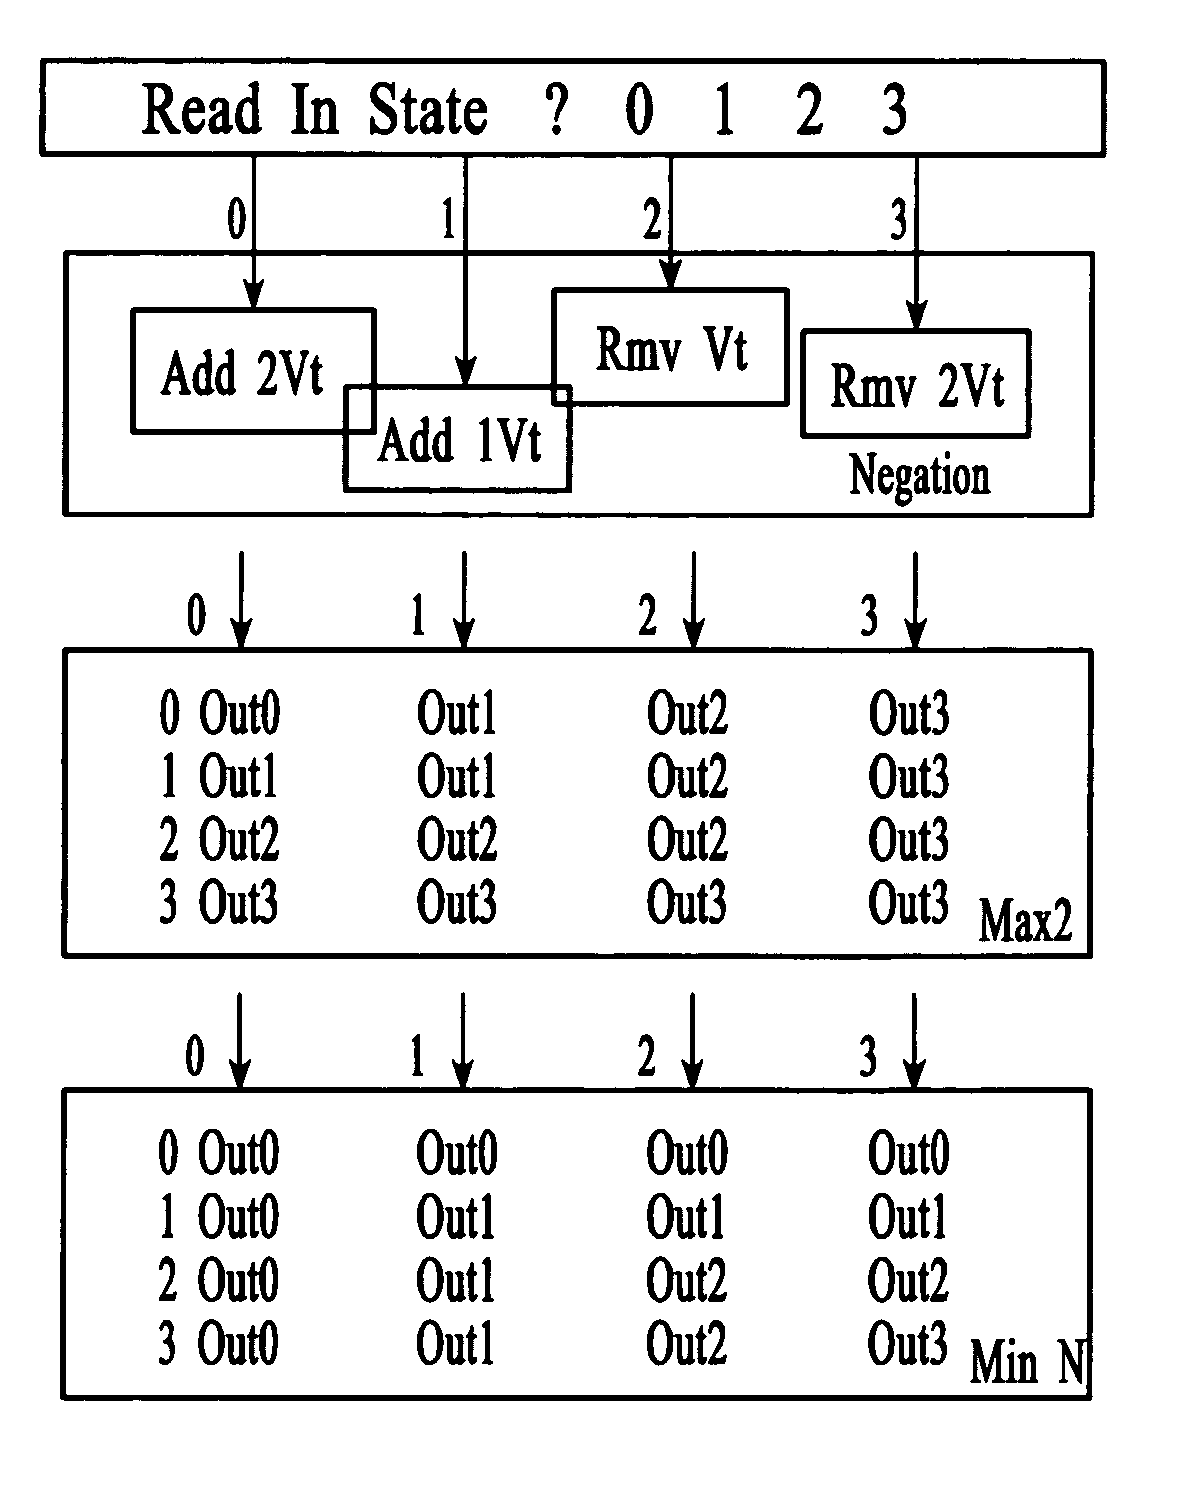 Quaternary and trinary logic switching circuits